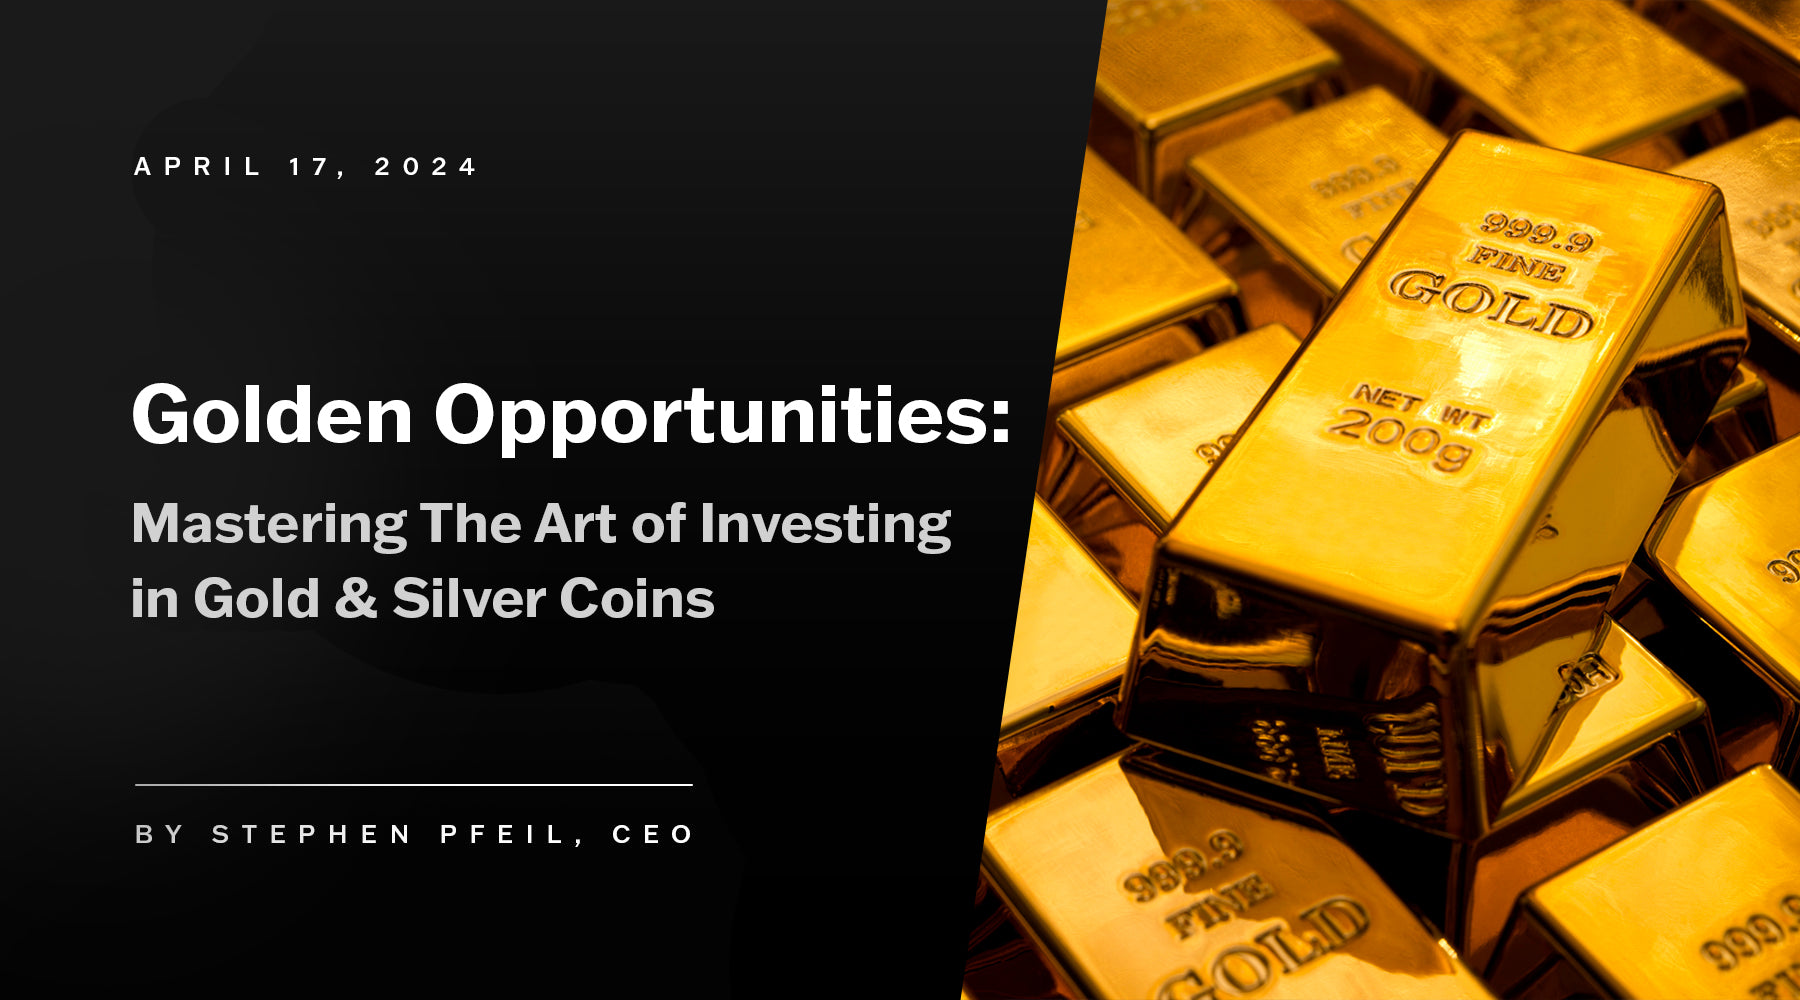 Golden Opportunities: Mastering the Art of Investing in Gold & Silver Coins